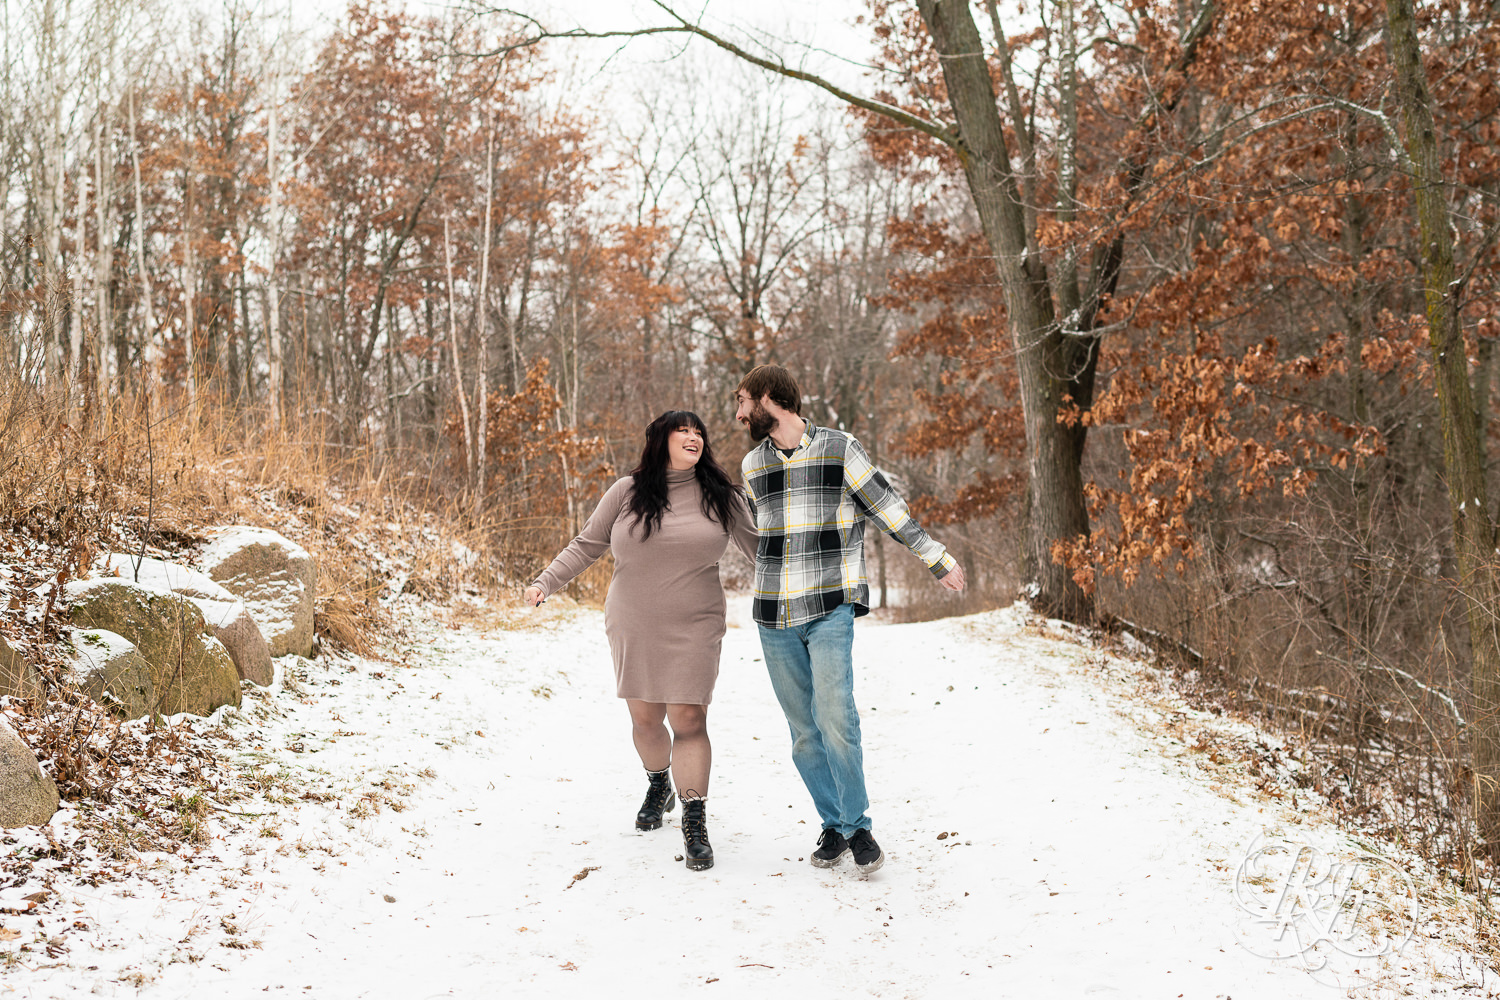 Man in flannel and woman in brown dress walk in the snow during winter engagement photos at Lebanon Hills Regional Park in Eagan, Minnesota.